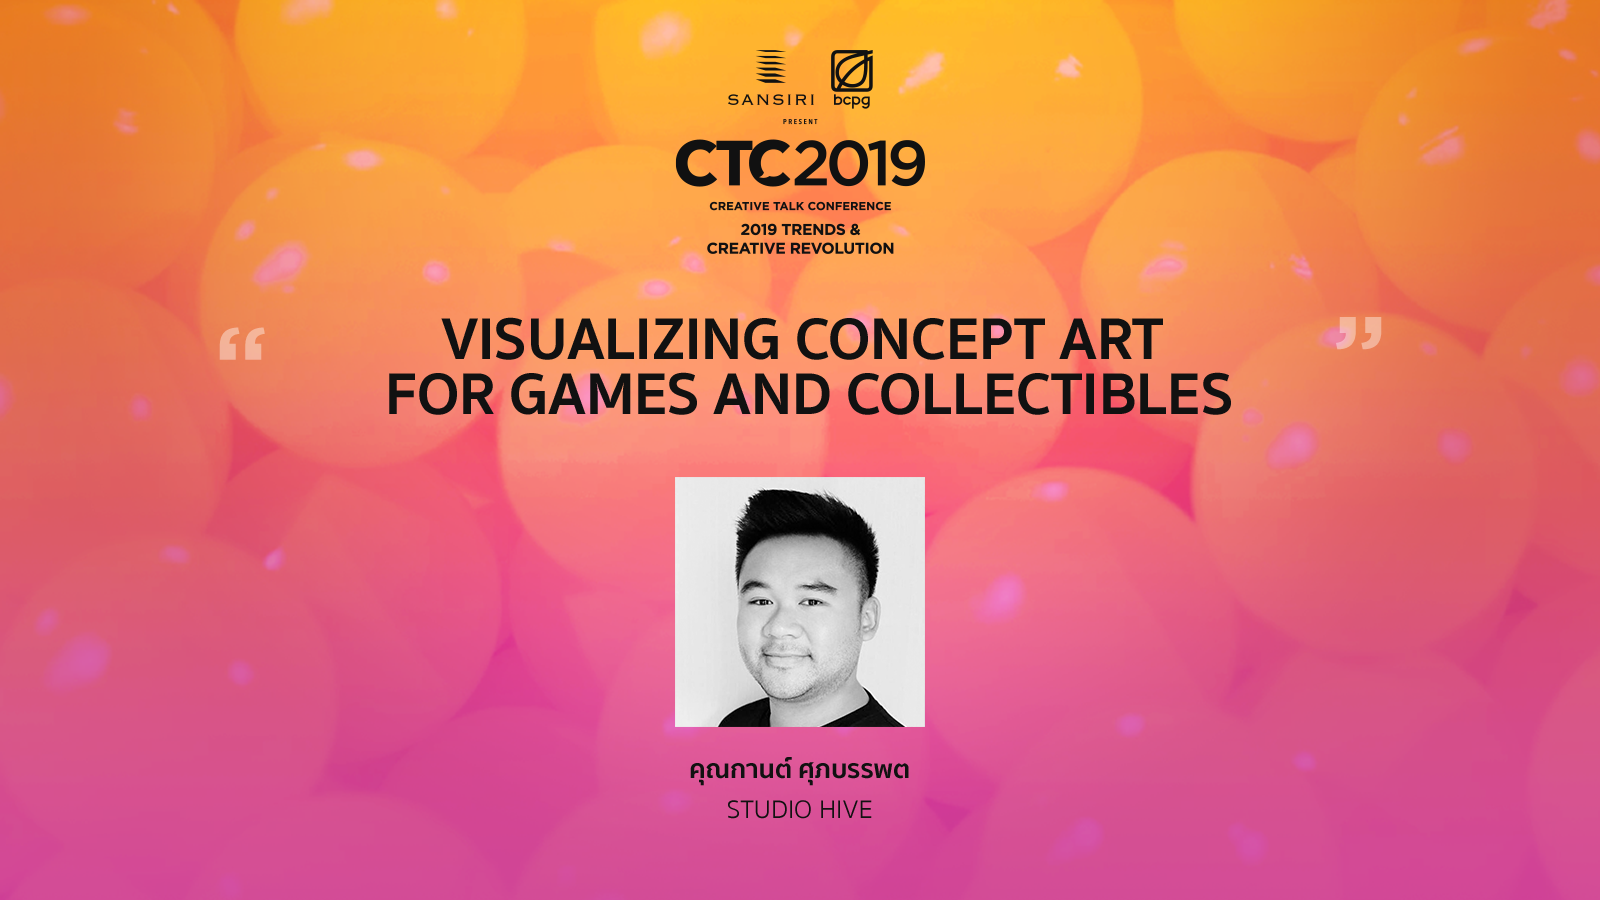 CTC2019: Visualizing Concept Art for Games and Collectibles